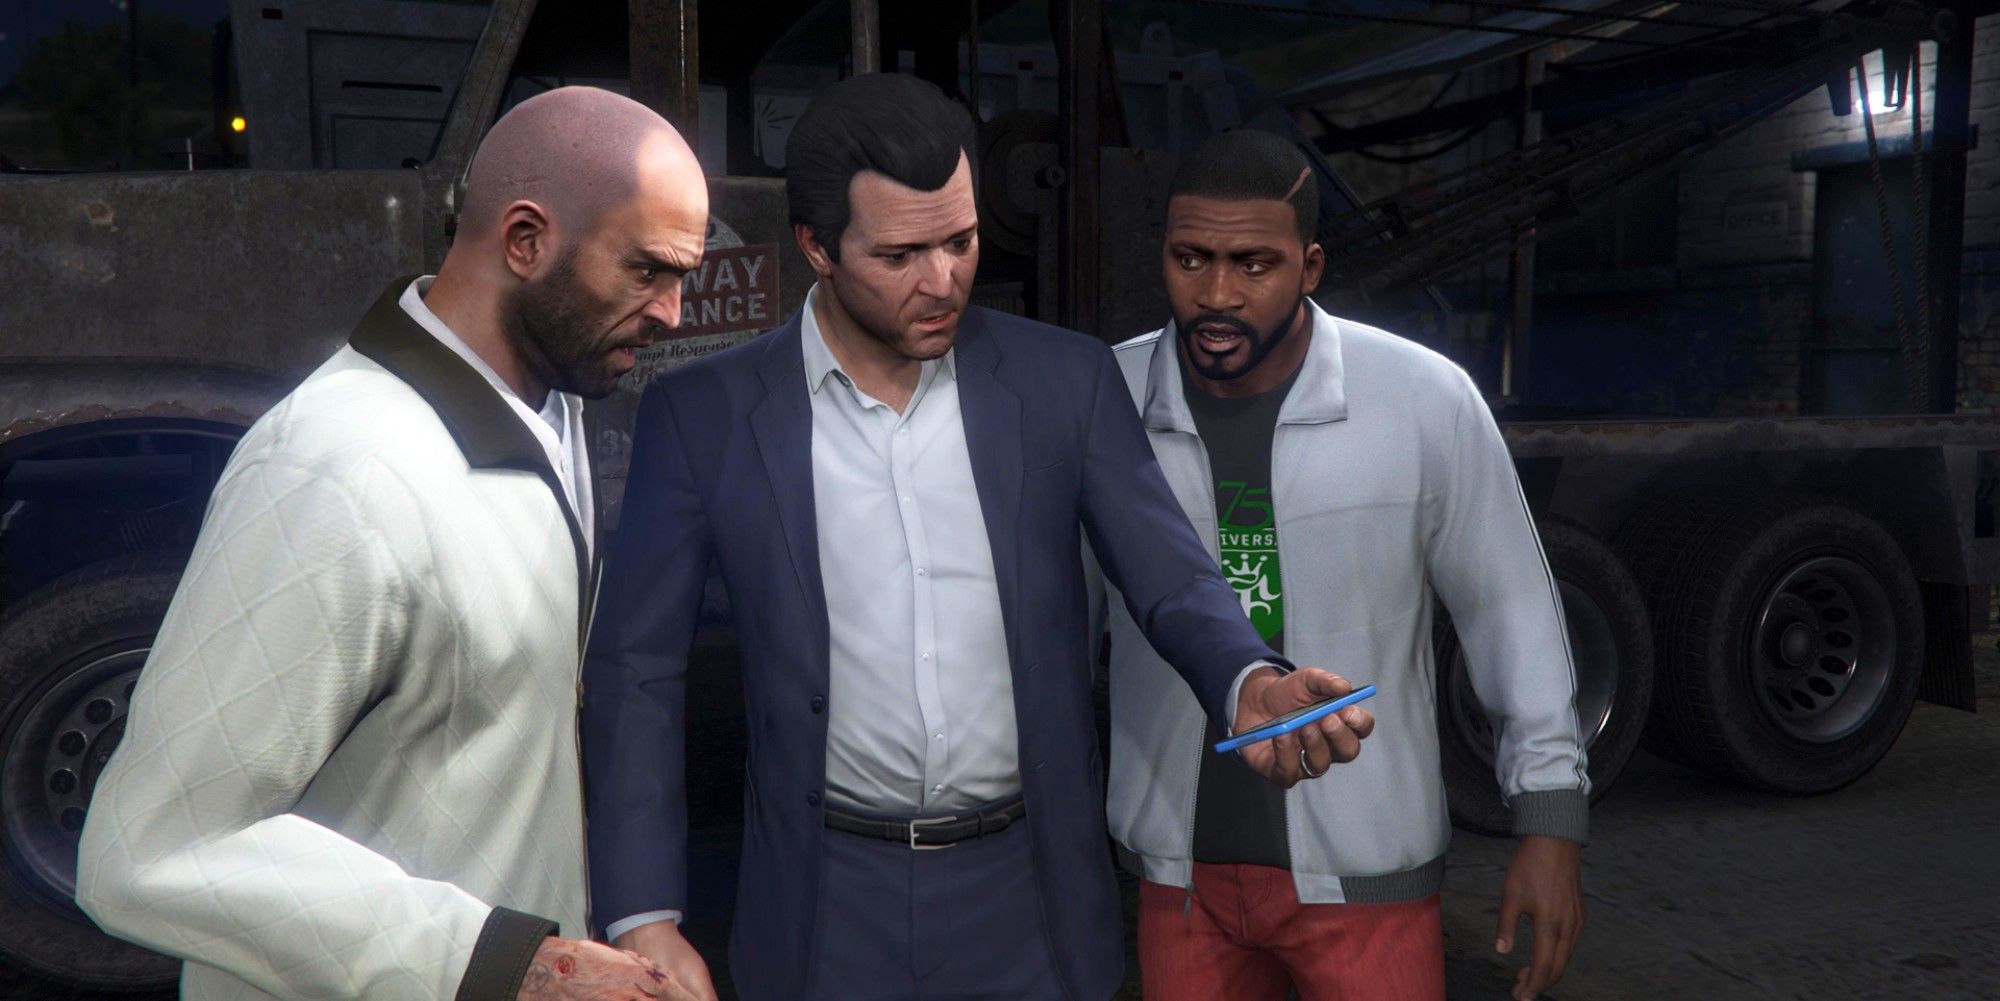 gta 5's trevor, michael, and franklin looking at a phone